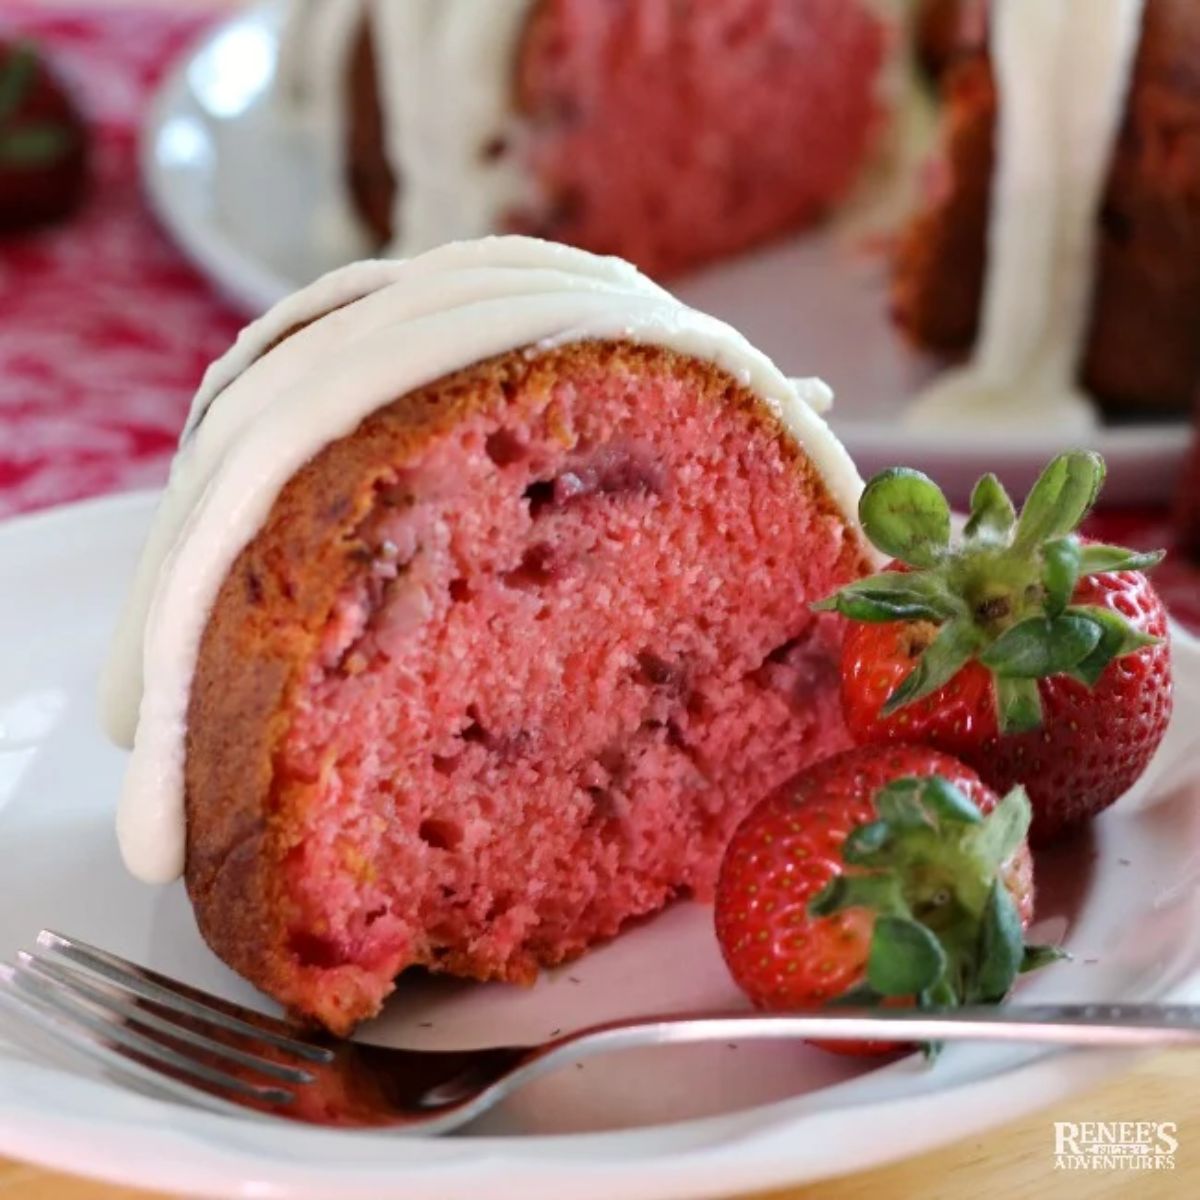 A piece of strawberry bundt cake on a white plate with a fork.